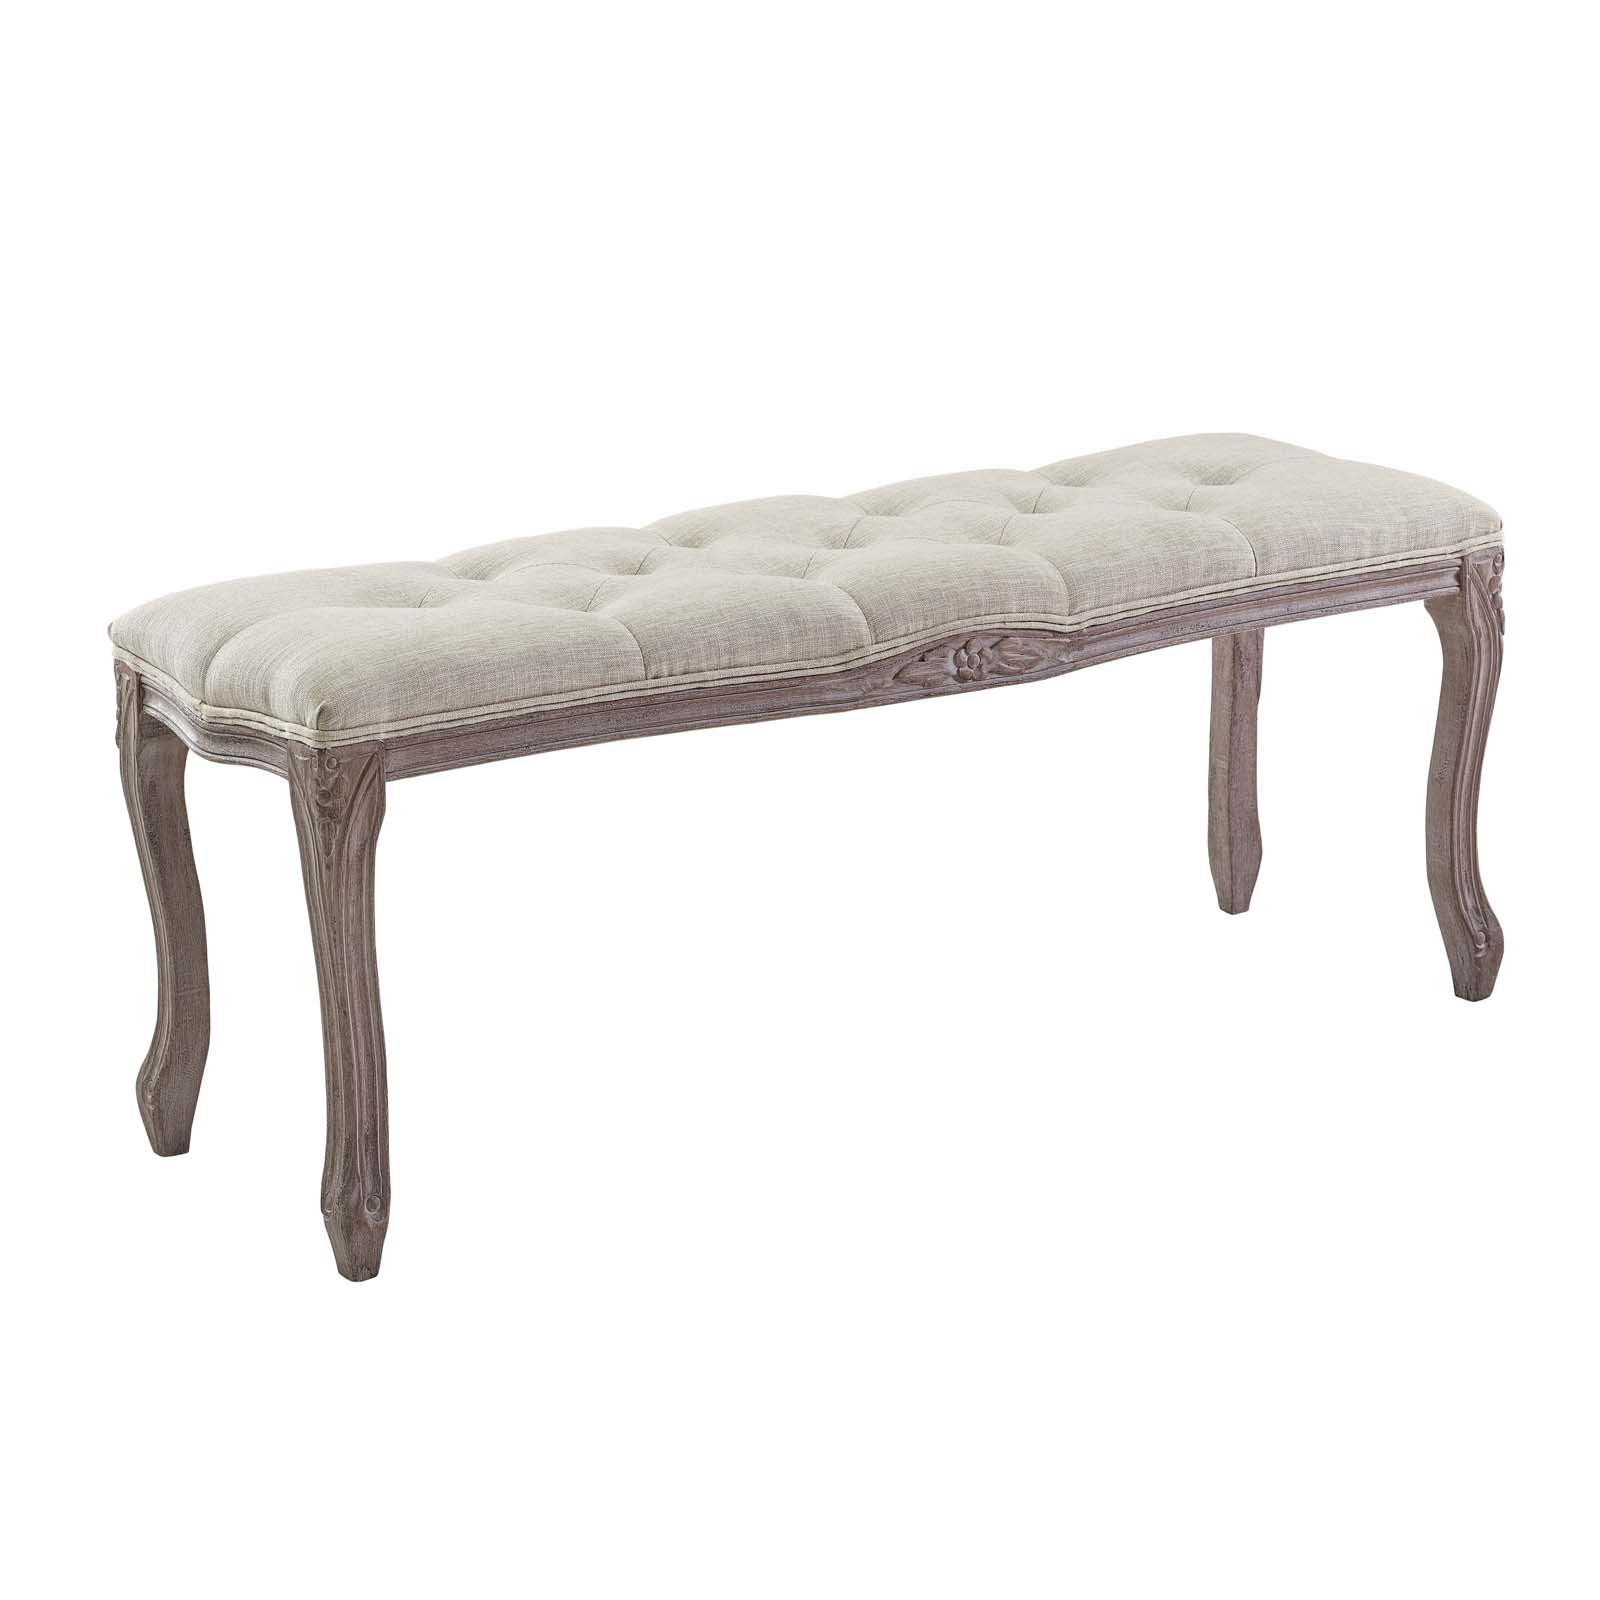 Regal Vintage French Upholstered Fabric Bench